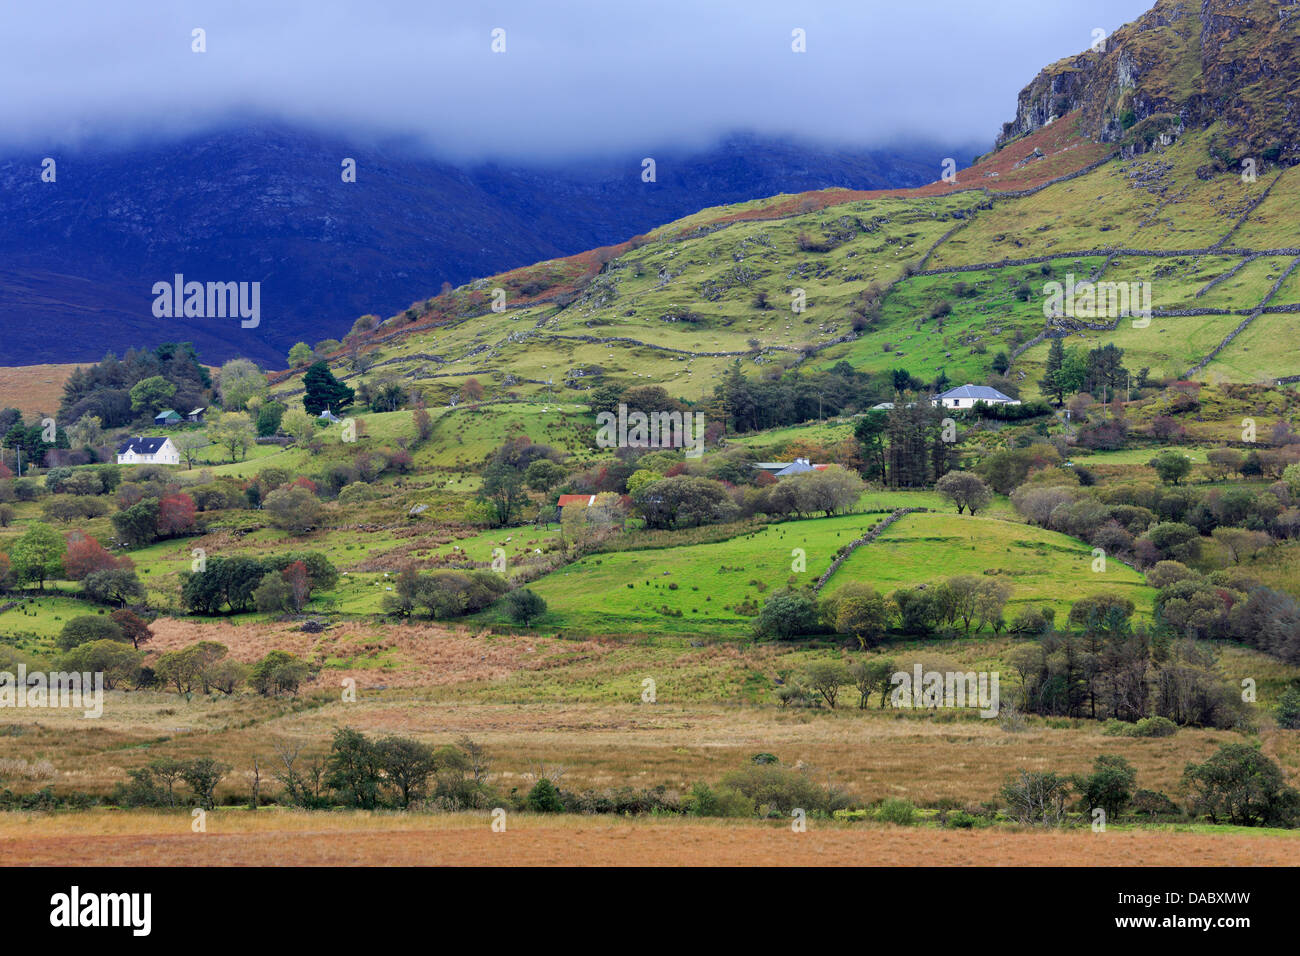 Mountains and rural landscape, Leenane, County Mayo, Connaught (Connacht), Republic of Ireland, Europe Stock Photo